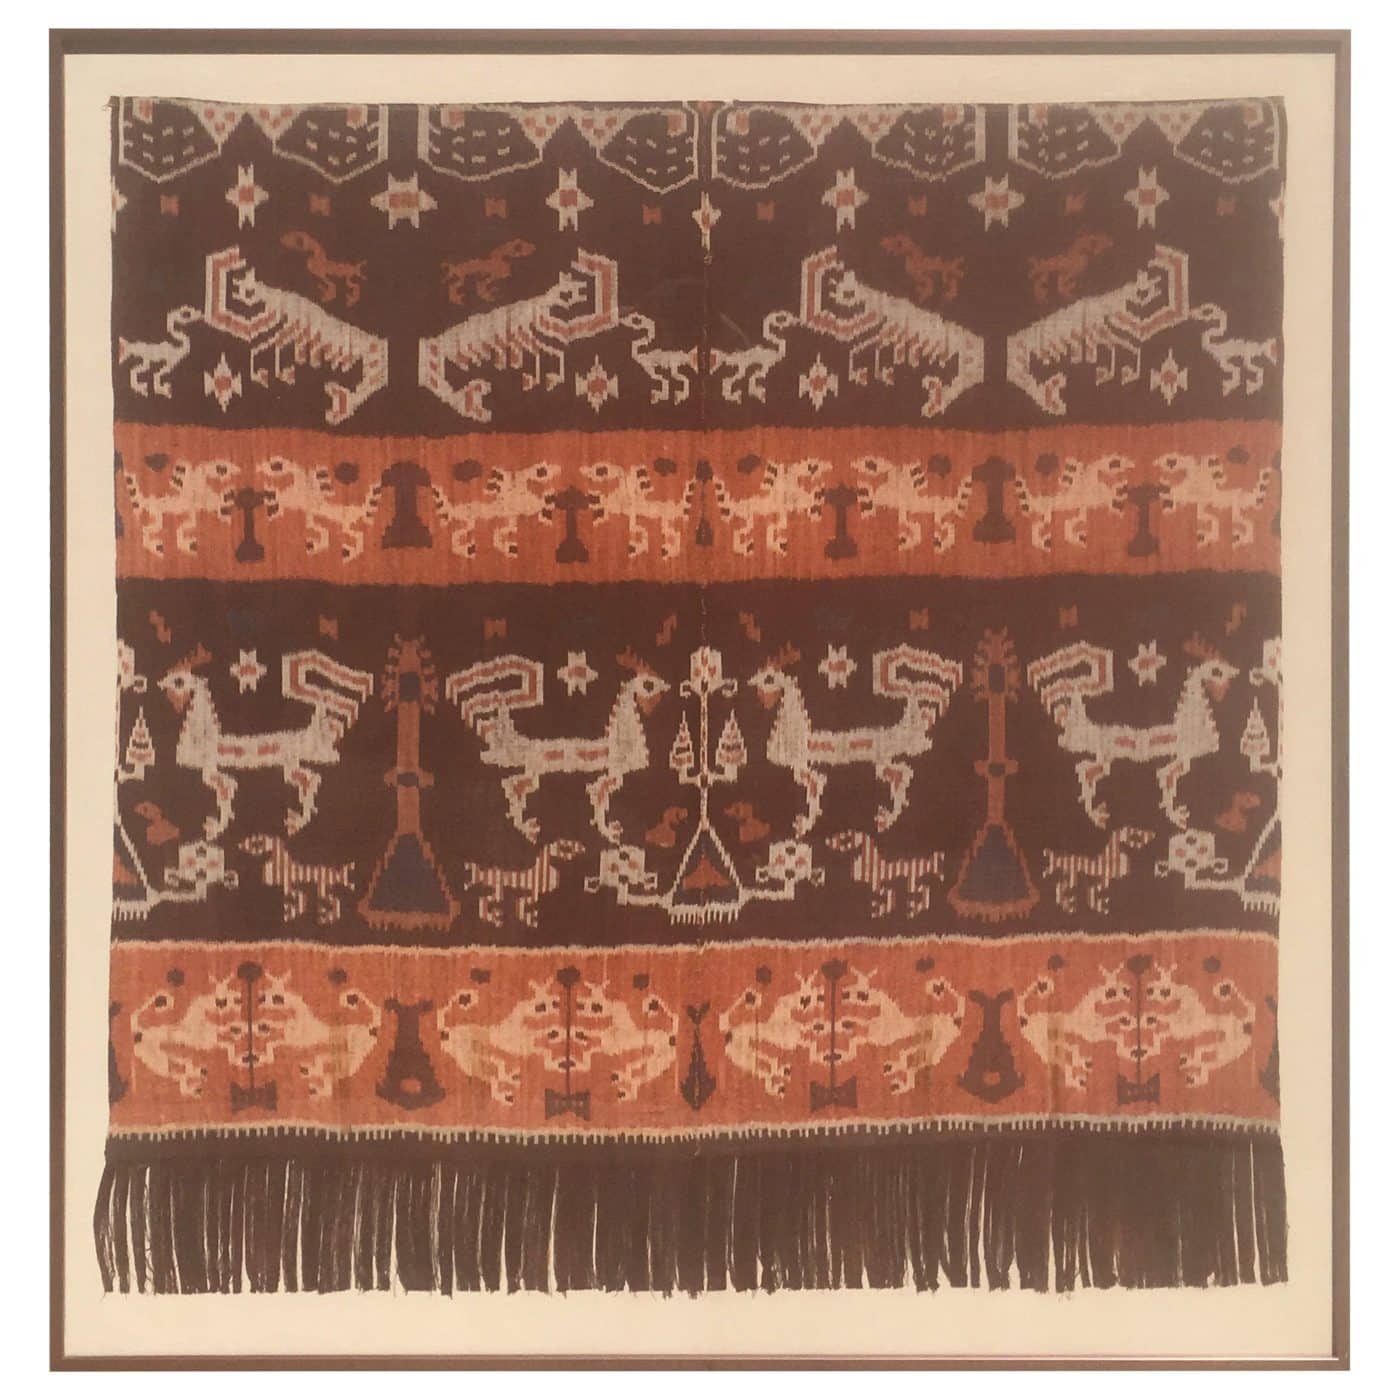 A framed swath of LATE-19TH-CENTURY FABRIC, likely from Indonesia, in shades of cream, red and brick